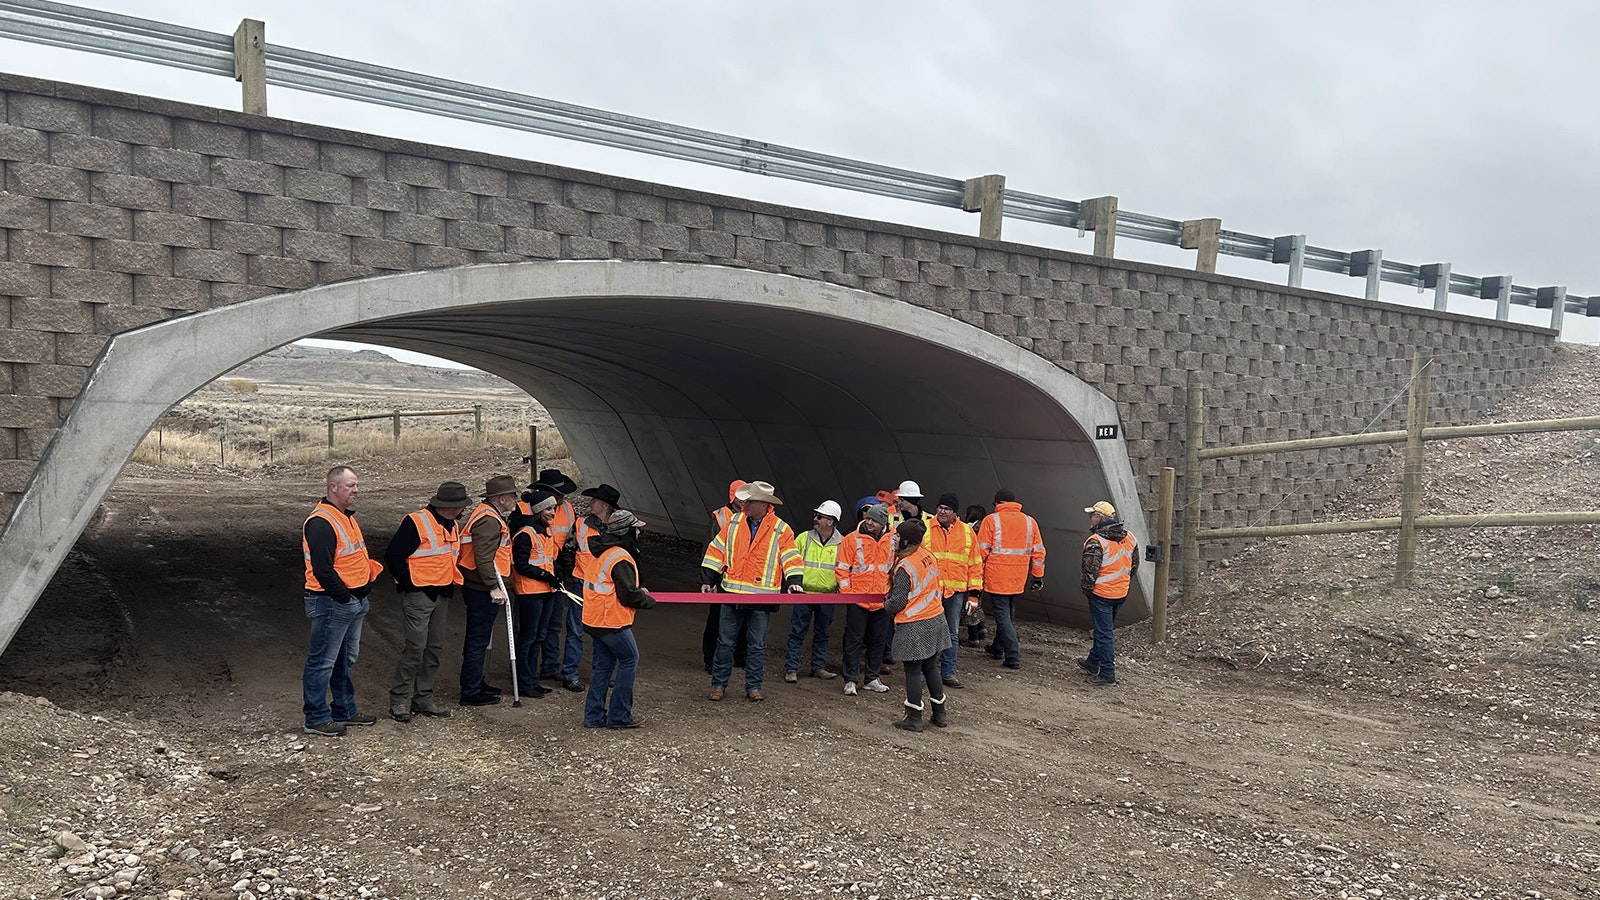 State and local officials gathered Oct. 12 to dedicate a new $15 million wildlife project on Highway 189 between Big Piney and La Barge.